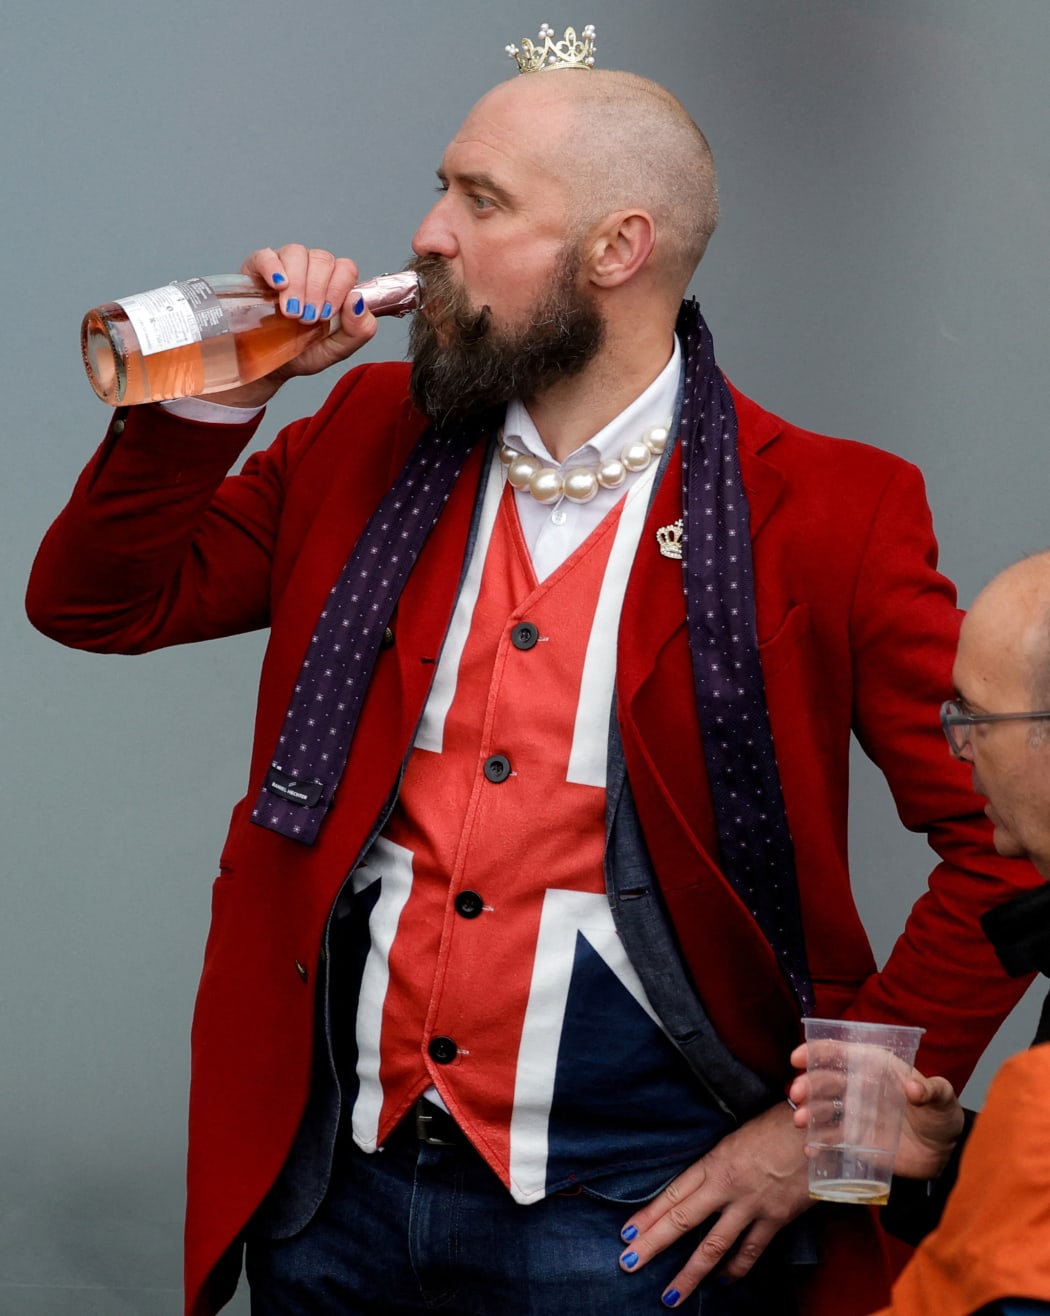 A person sporting a Union Jack waistcoat and wearing a small crown on his head, drinks following the Coronation Ceremony for King Charles III and Queen Camilla at Westminster Abbey in central London, on May 6, 2023. - The set-piece coronation is the first in Britain in 70 years, and only the second in history to be televised. Charles will be the 40th reigning monarch to be crowned at the central London church since King William I in 1066. Outside the UK, he is also king of 14 other Commonwealth countries, including Australia, Canada and New Zealand. (Photo by PIROSCHKA VAN DE WOUW / POOL / AFP)